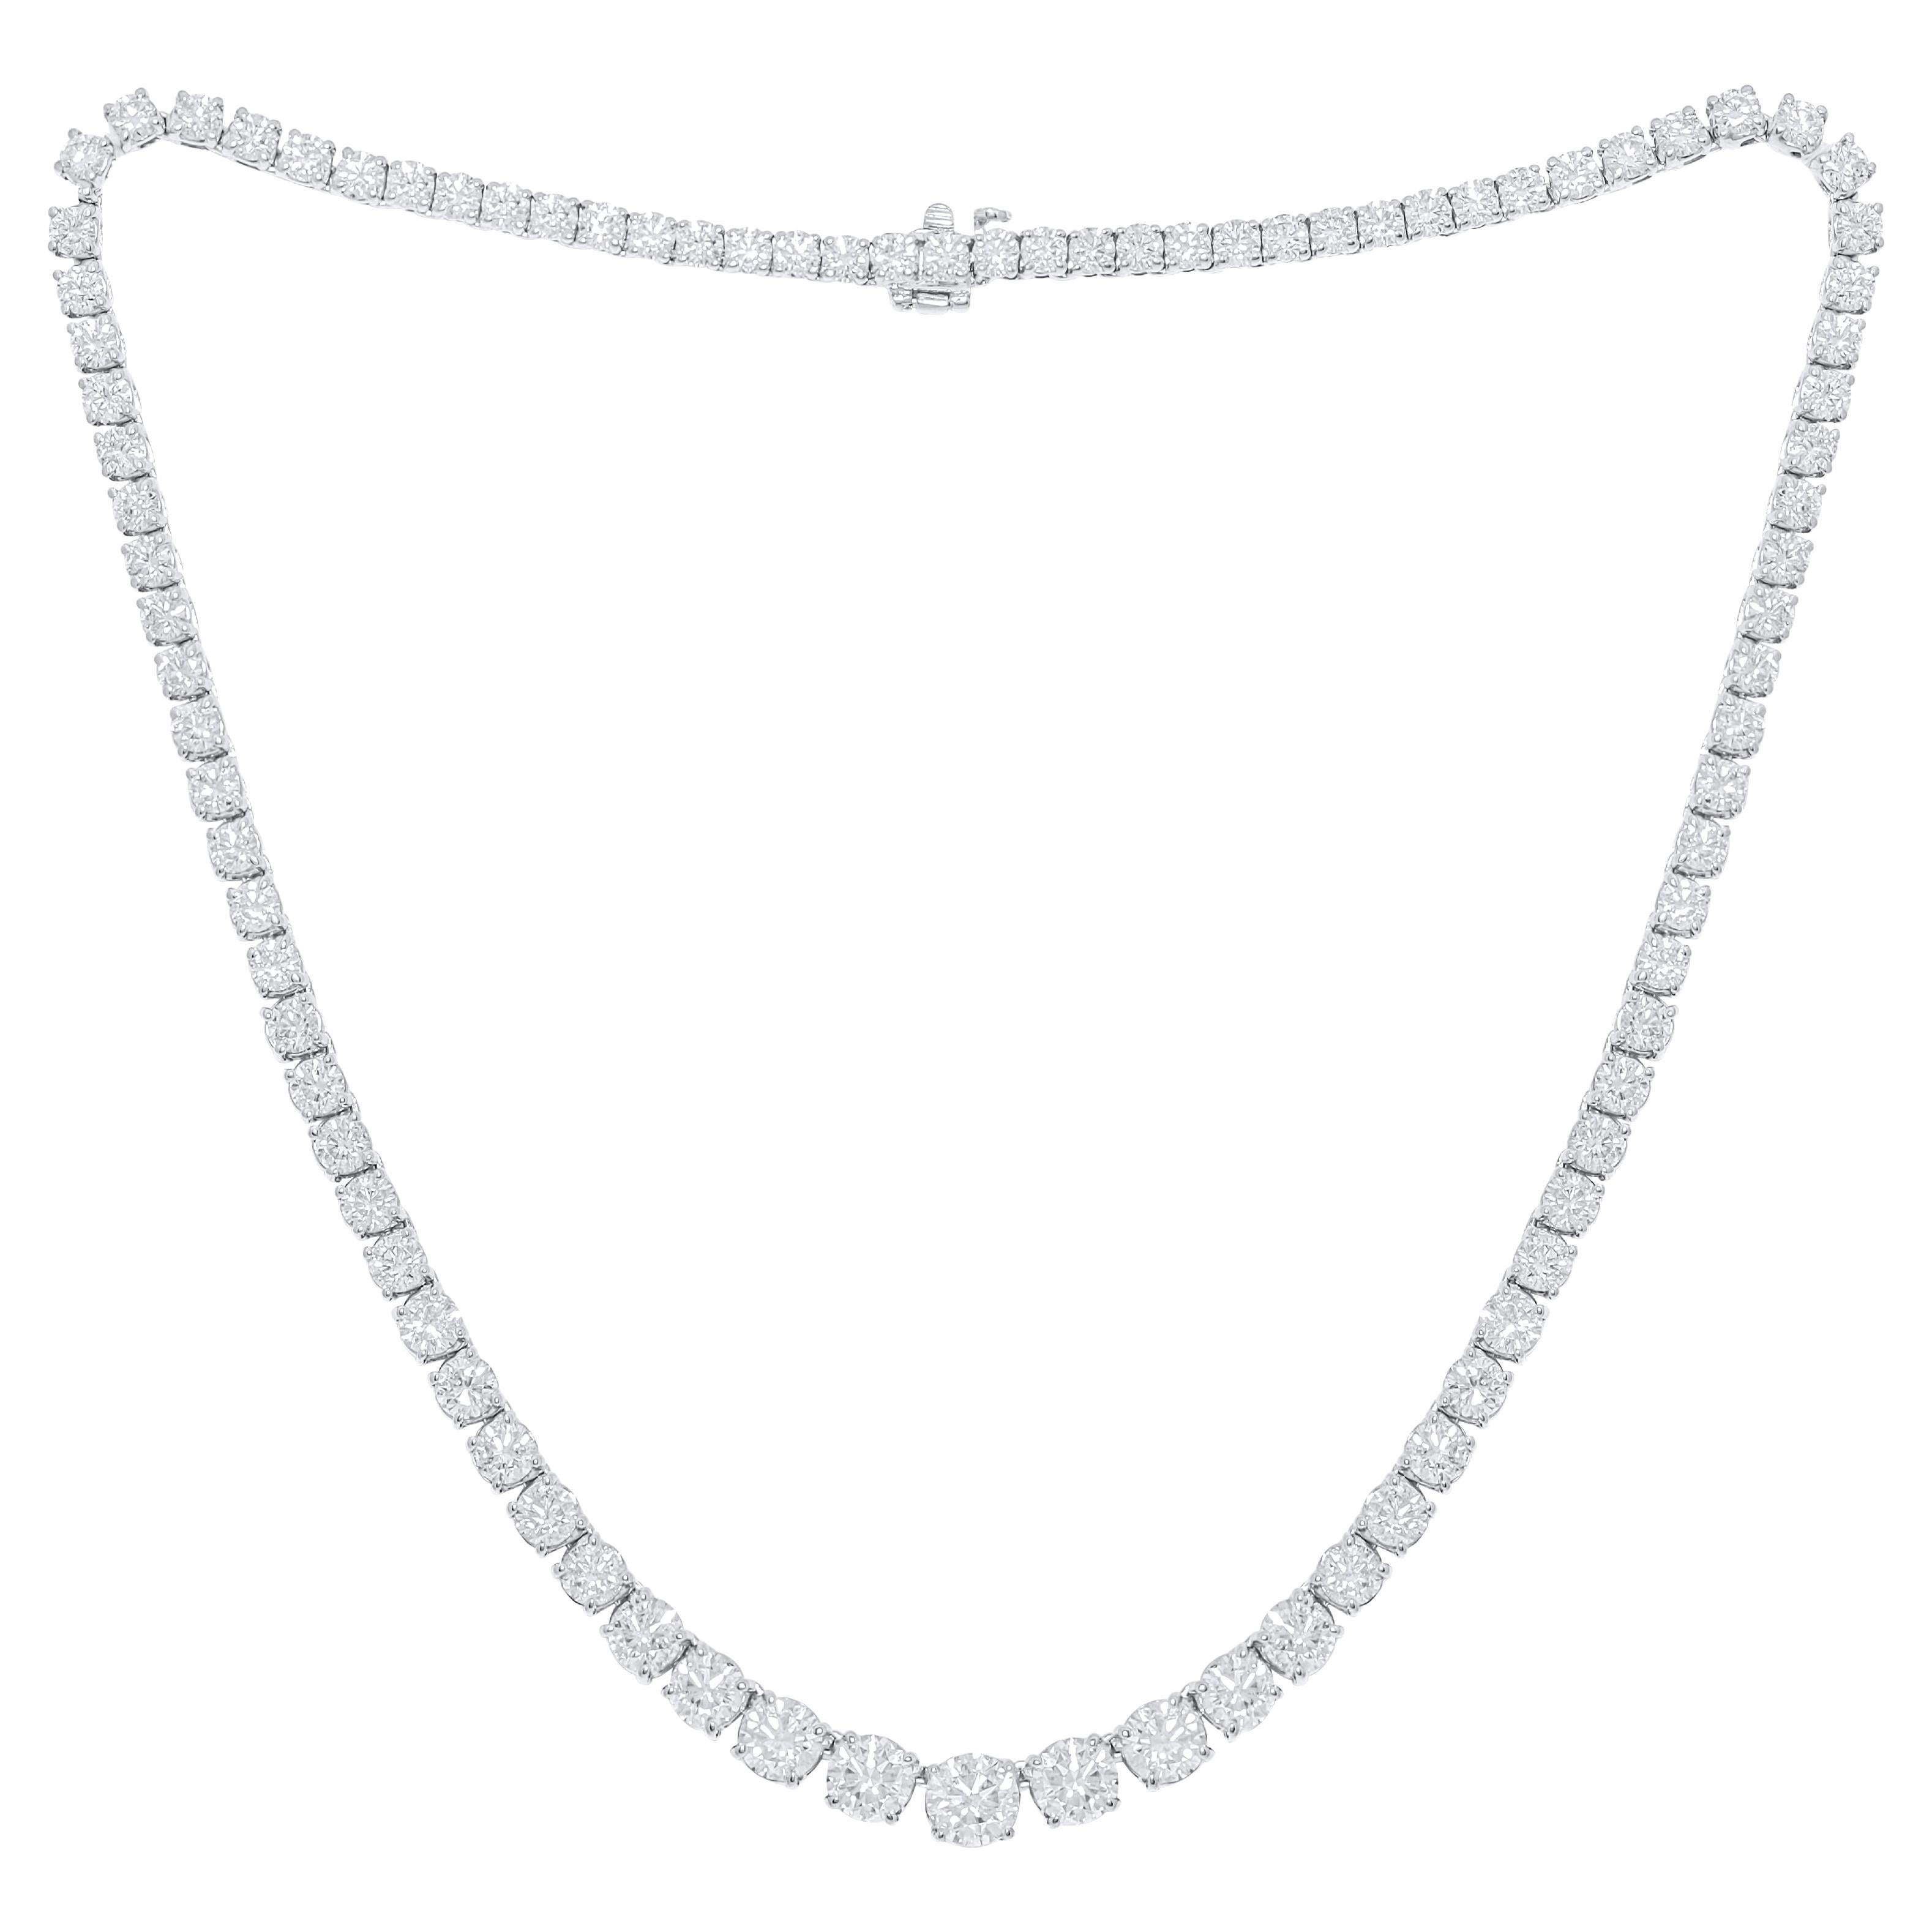 Diana M. Custom 16.75 Cts Round 4 Prong Diamond 14k White Gold Tennis Necklace  For Sale